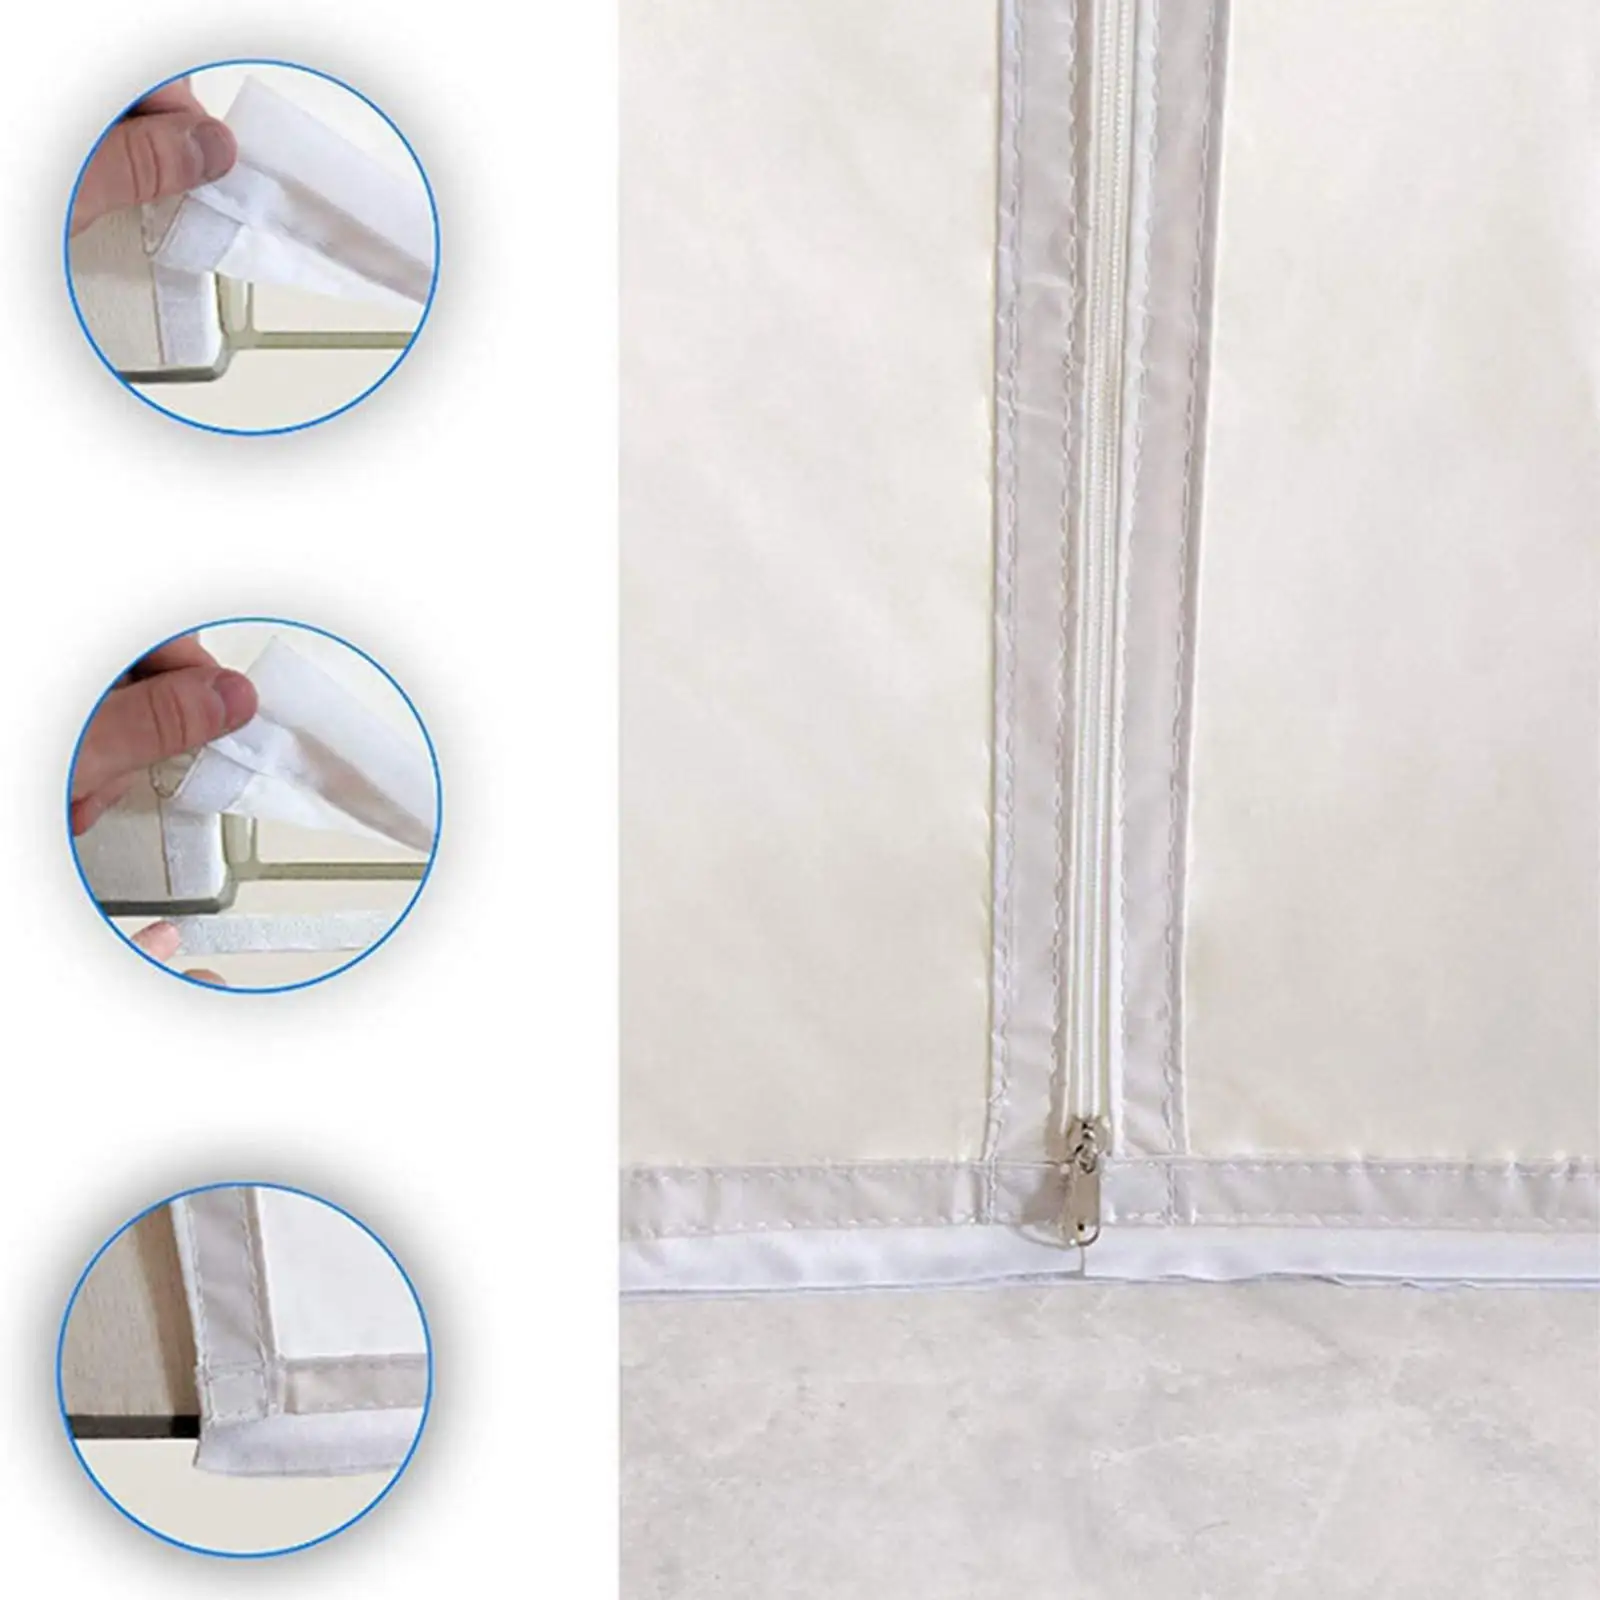 Door Seal for Portable Air Conditioner and Tumble Dryer 87.7`` x 35.4`` Easy to Install for Home Bathroom